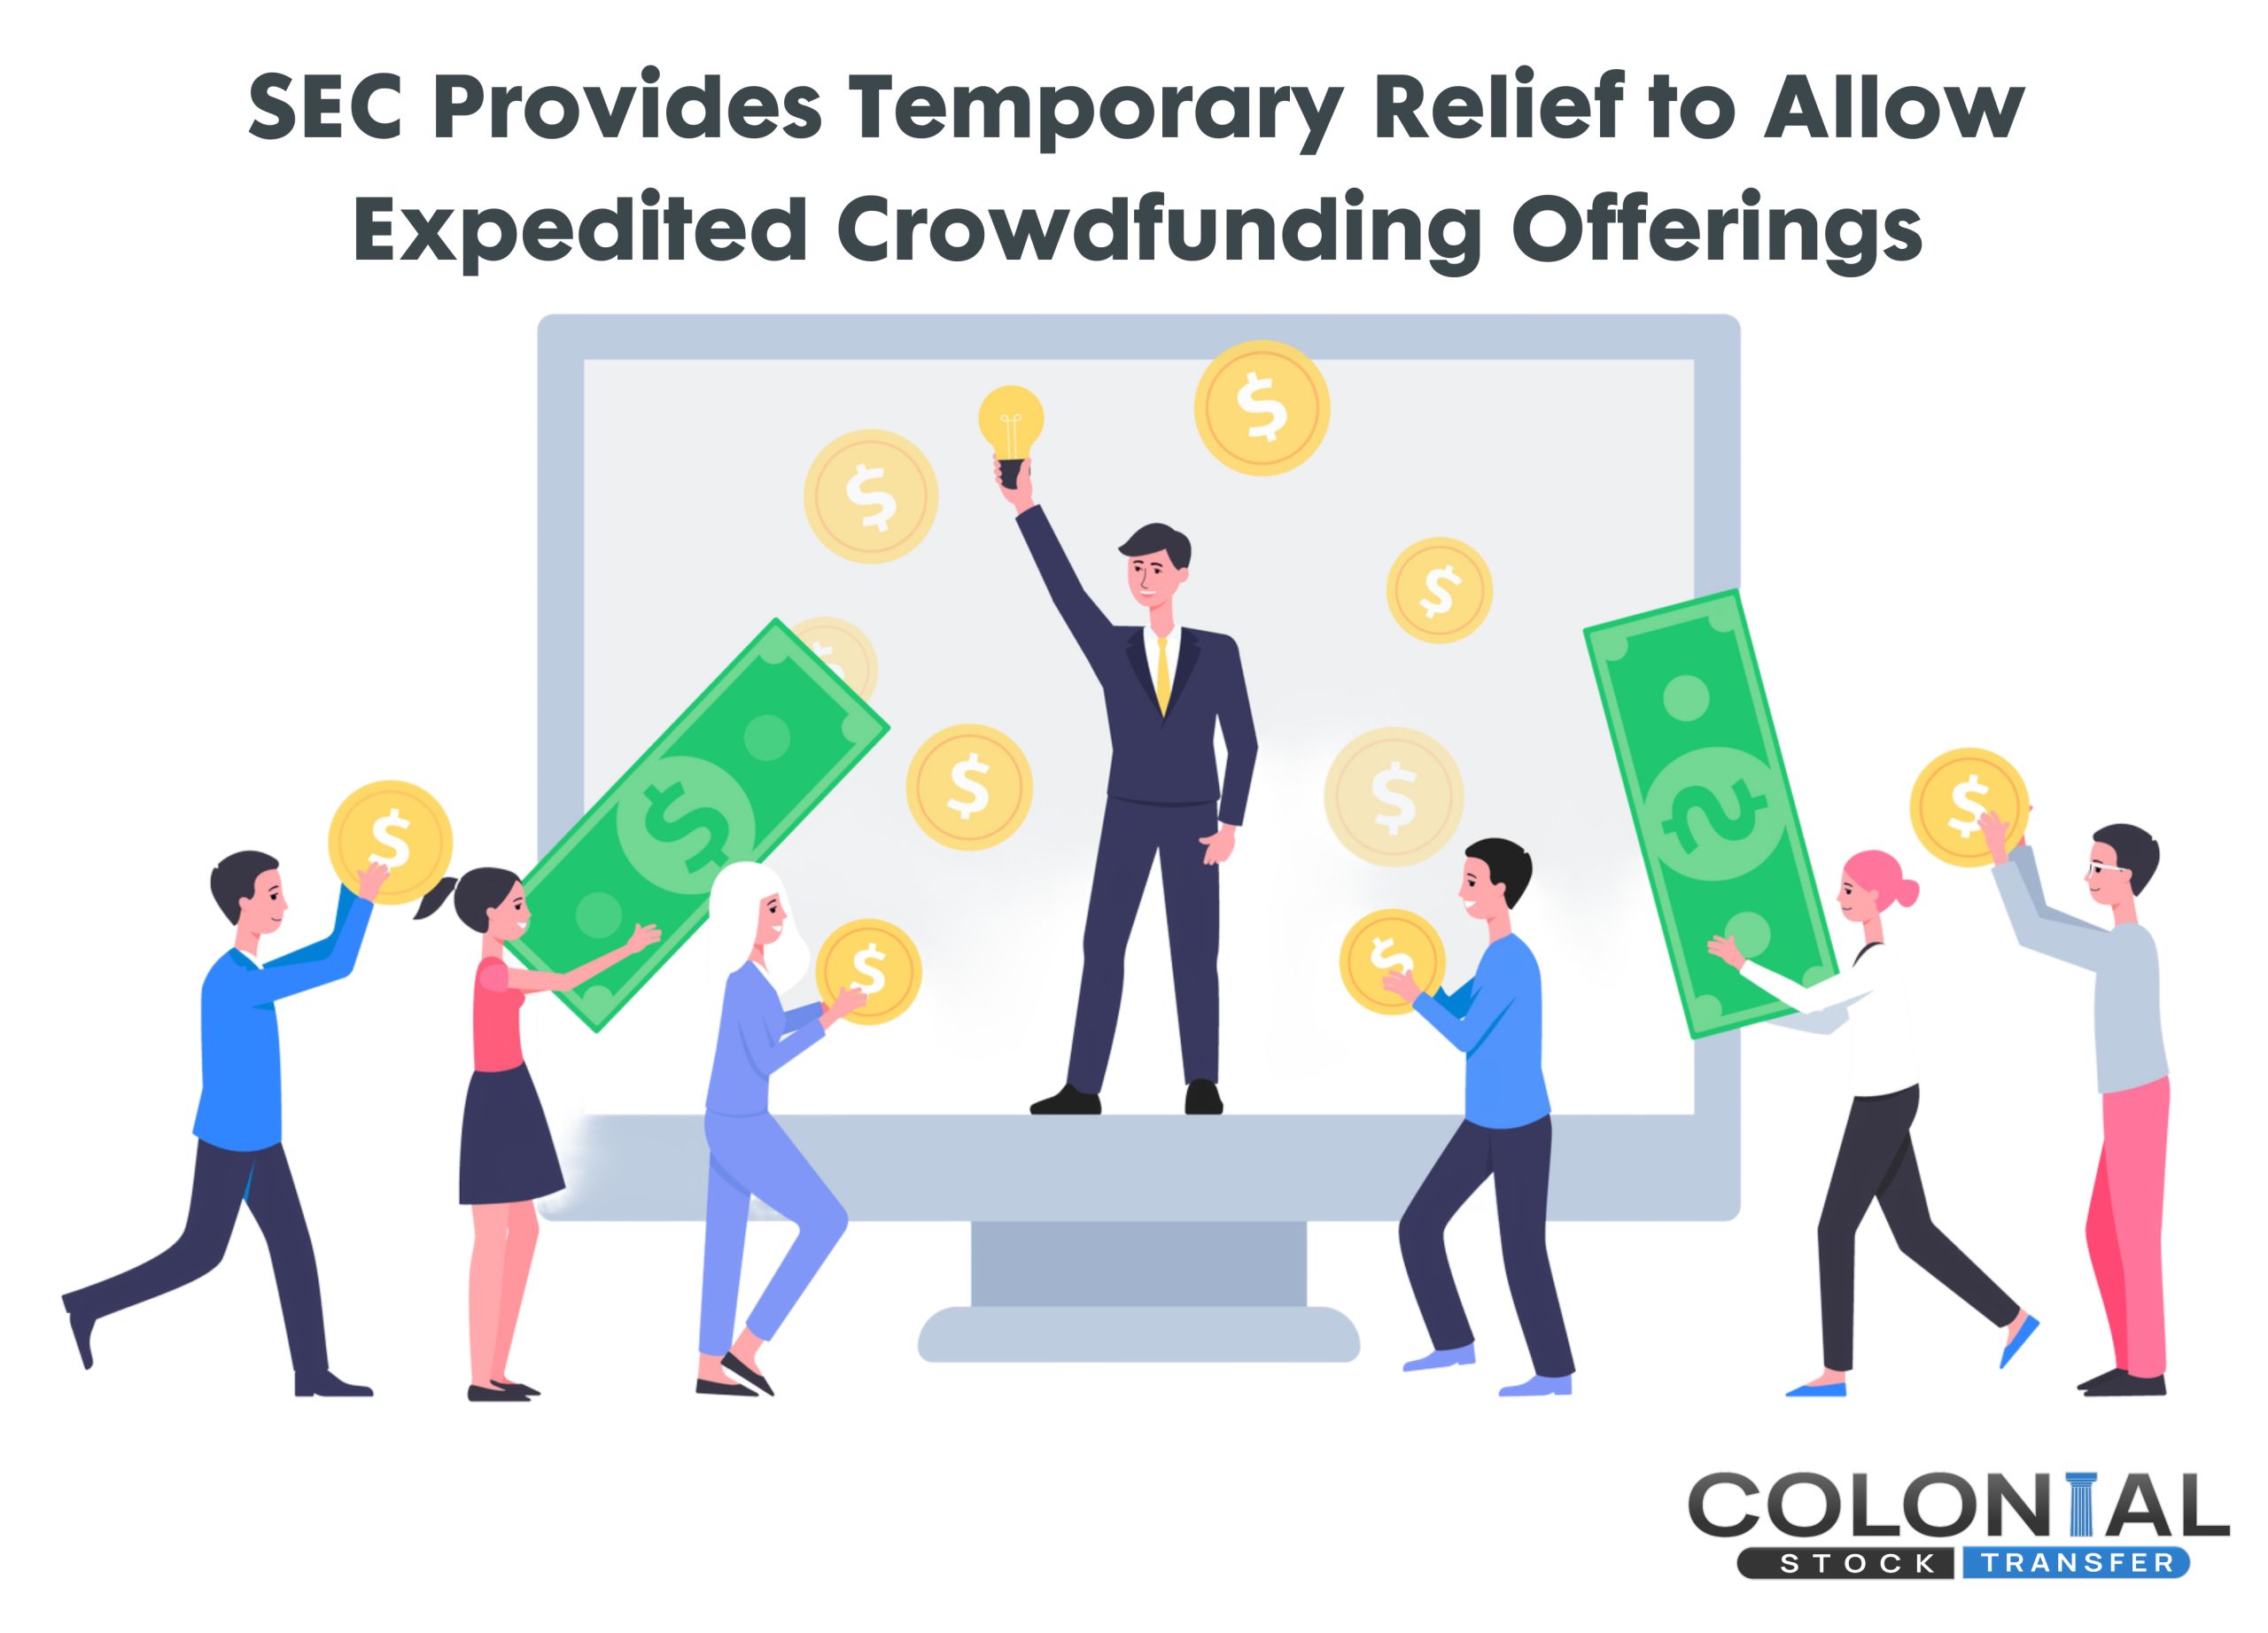 SEC Provides Temporary Relief to Allow Expedited Crowdfunding Offerings